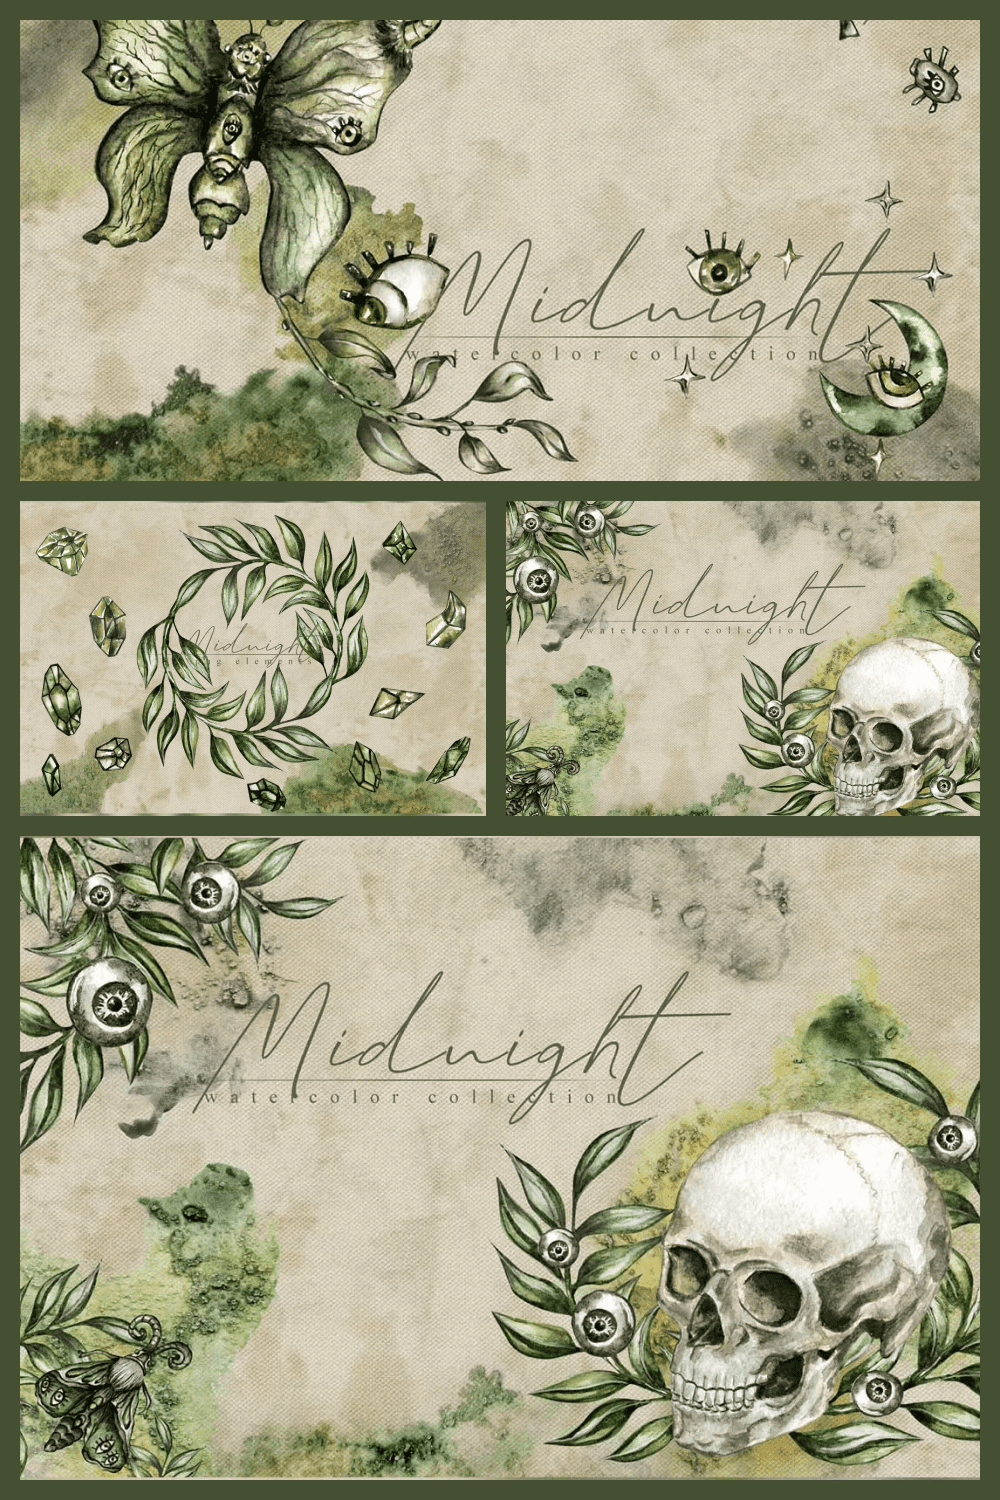 Collage of images of a skull and leaves on a green background.